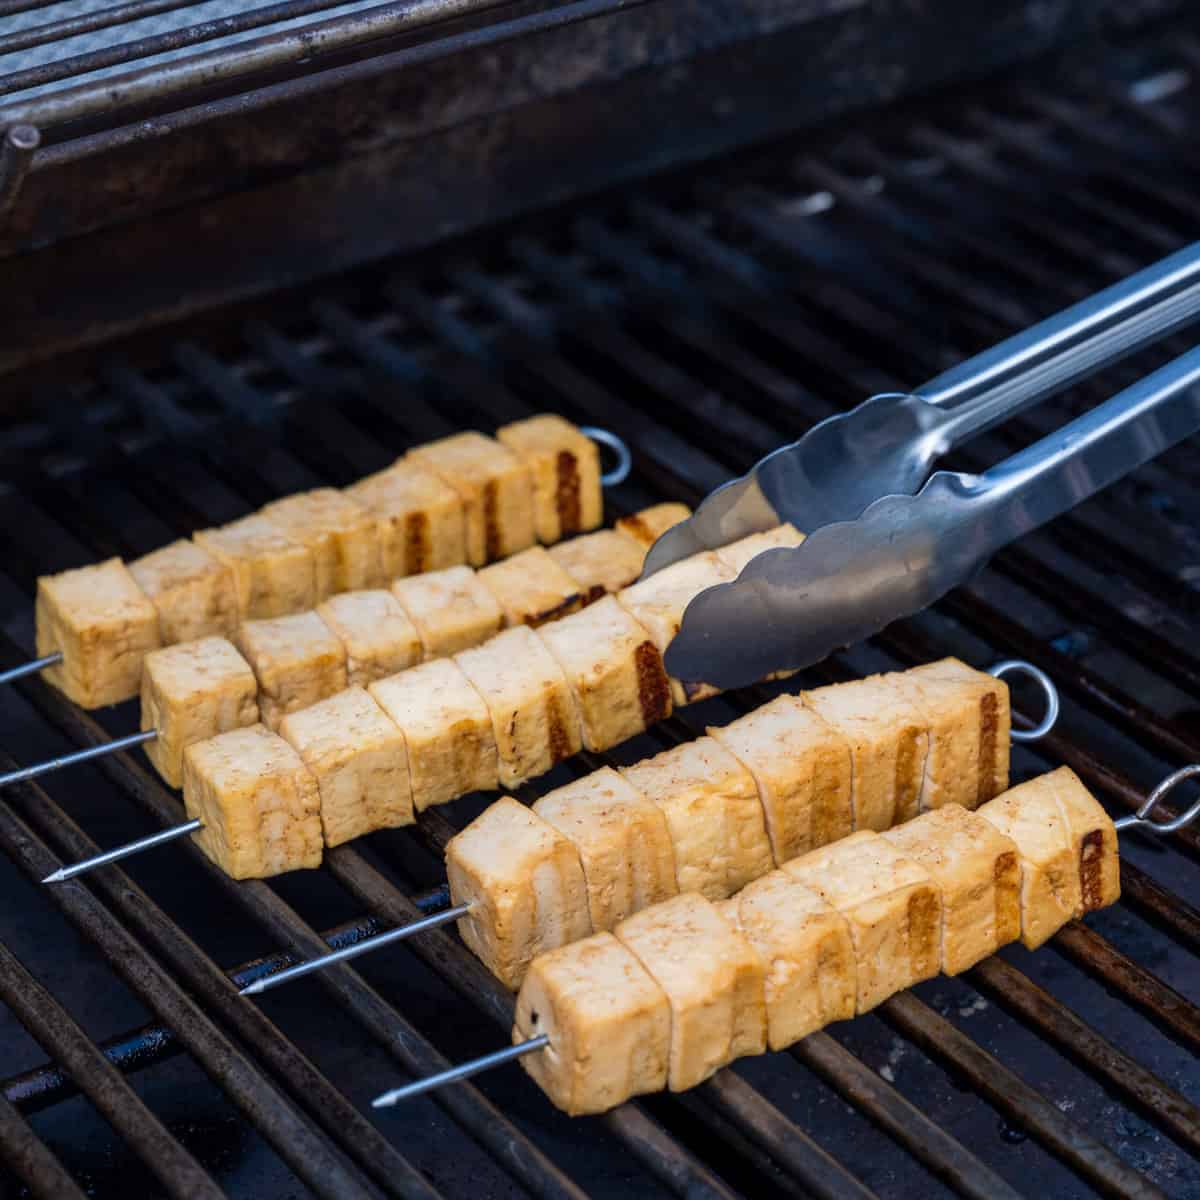 Tongs flipping tofu skewers on an outdoor gas grill.